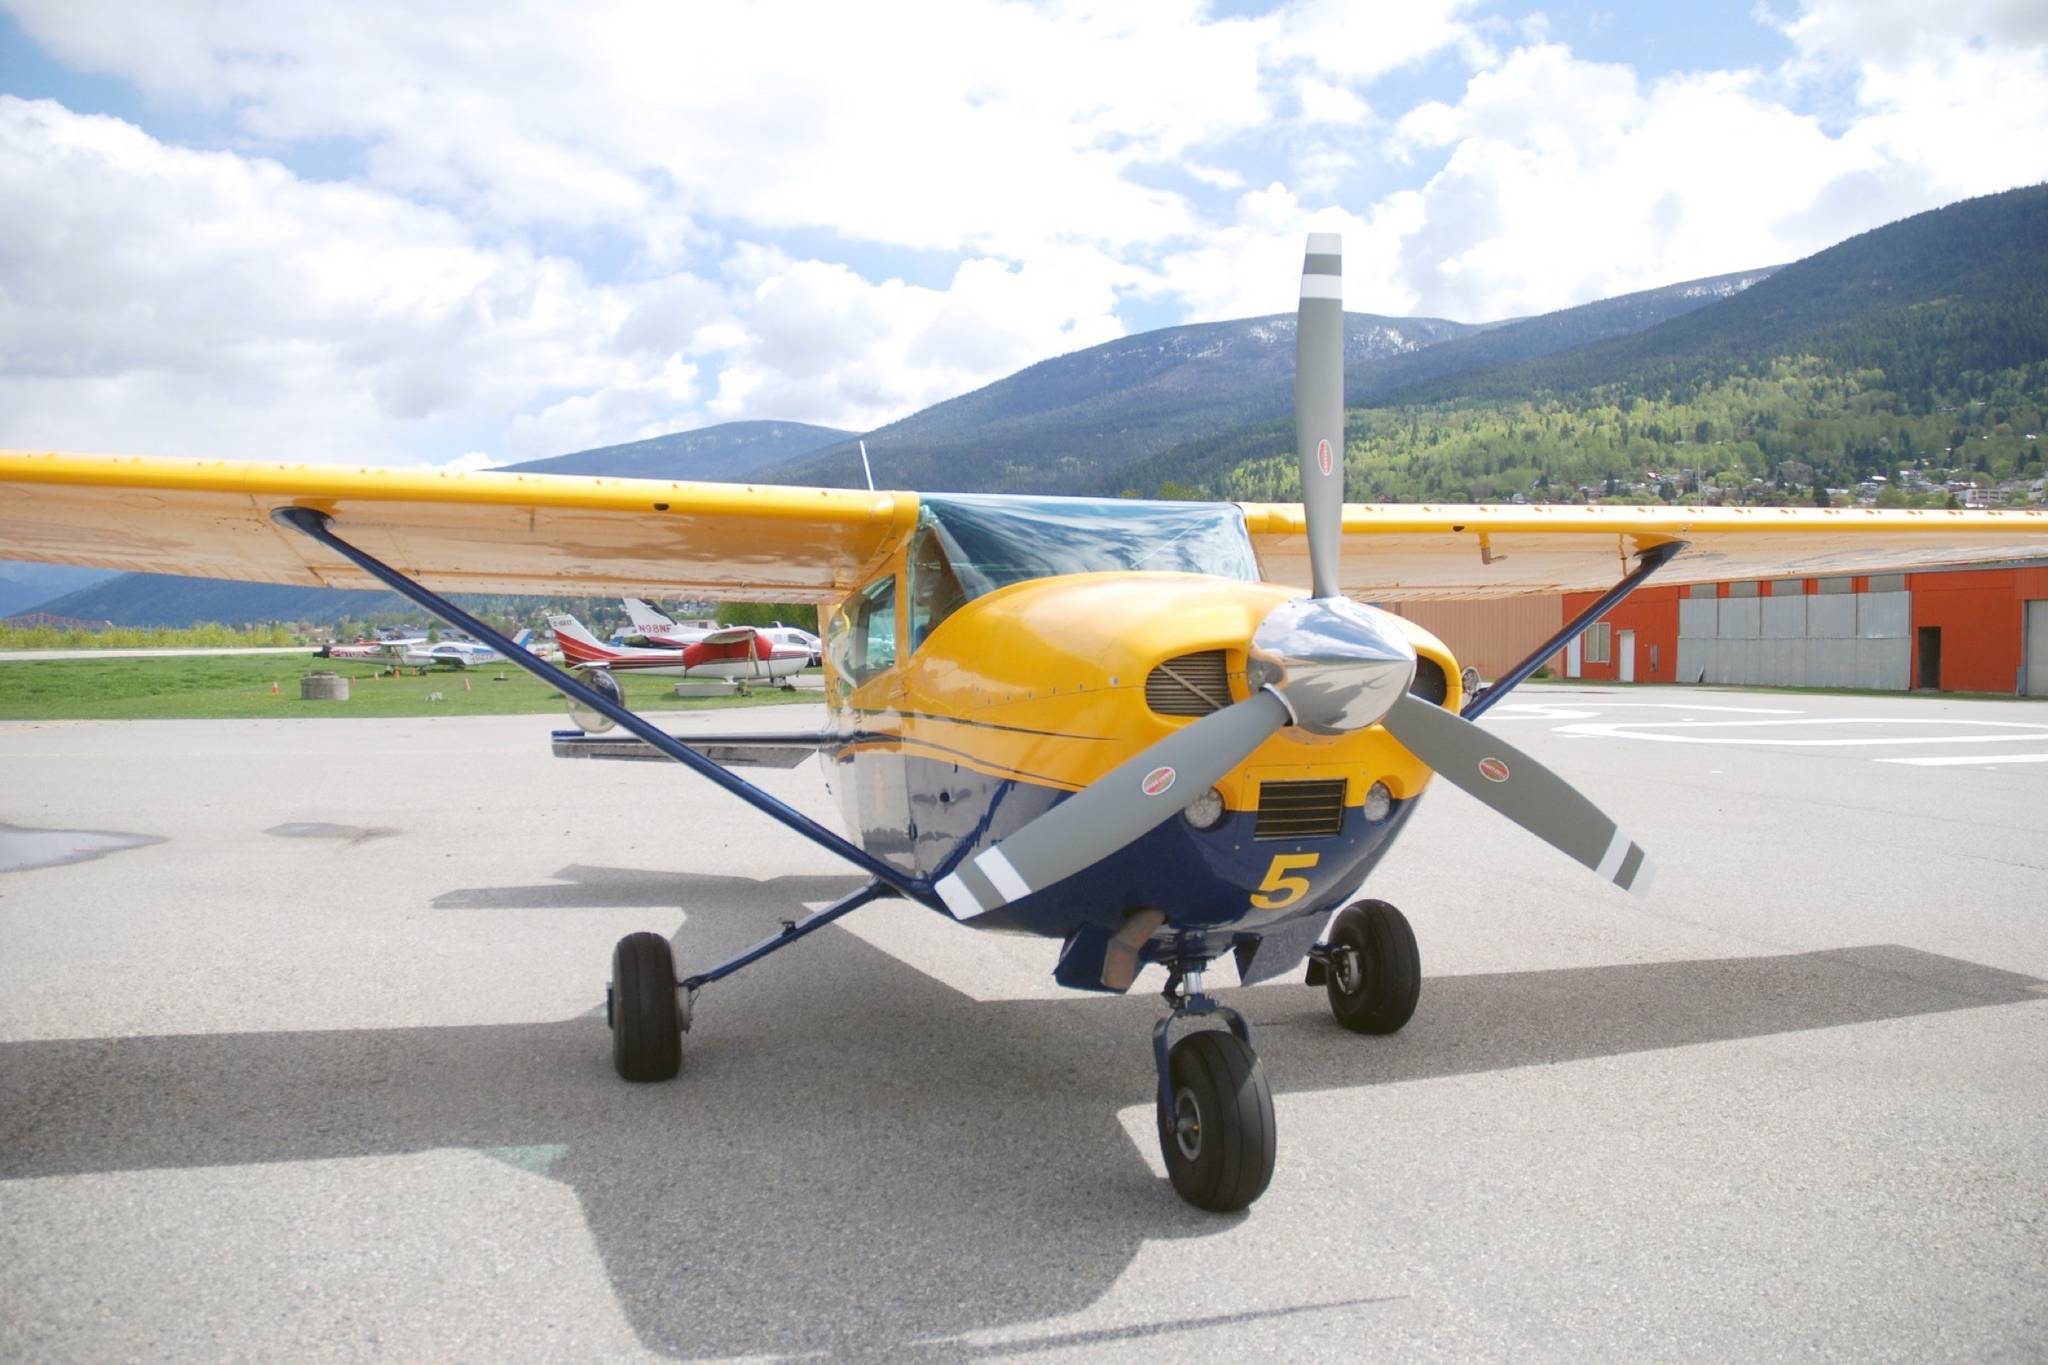 web1_170522-CAN-M-Cessna182_in_Nelson